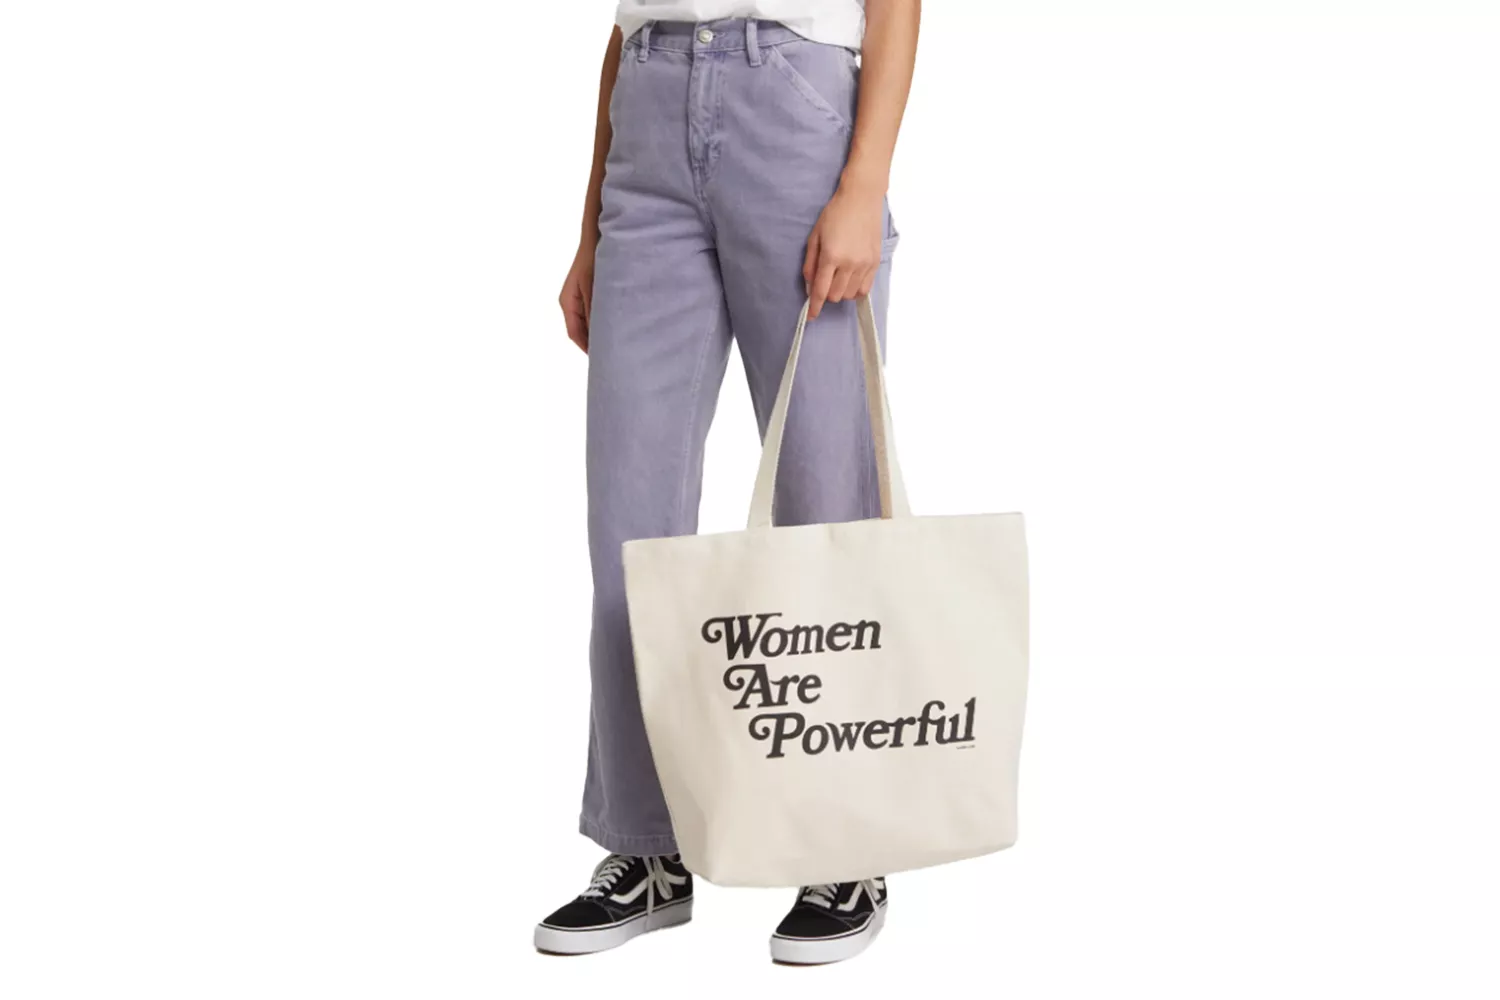 One DNA Women Are Powerful Tote